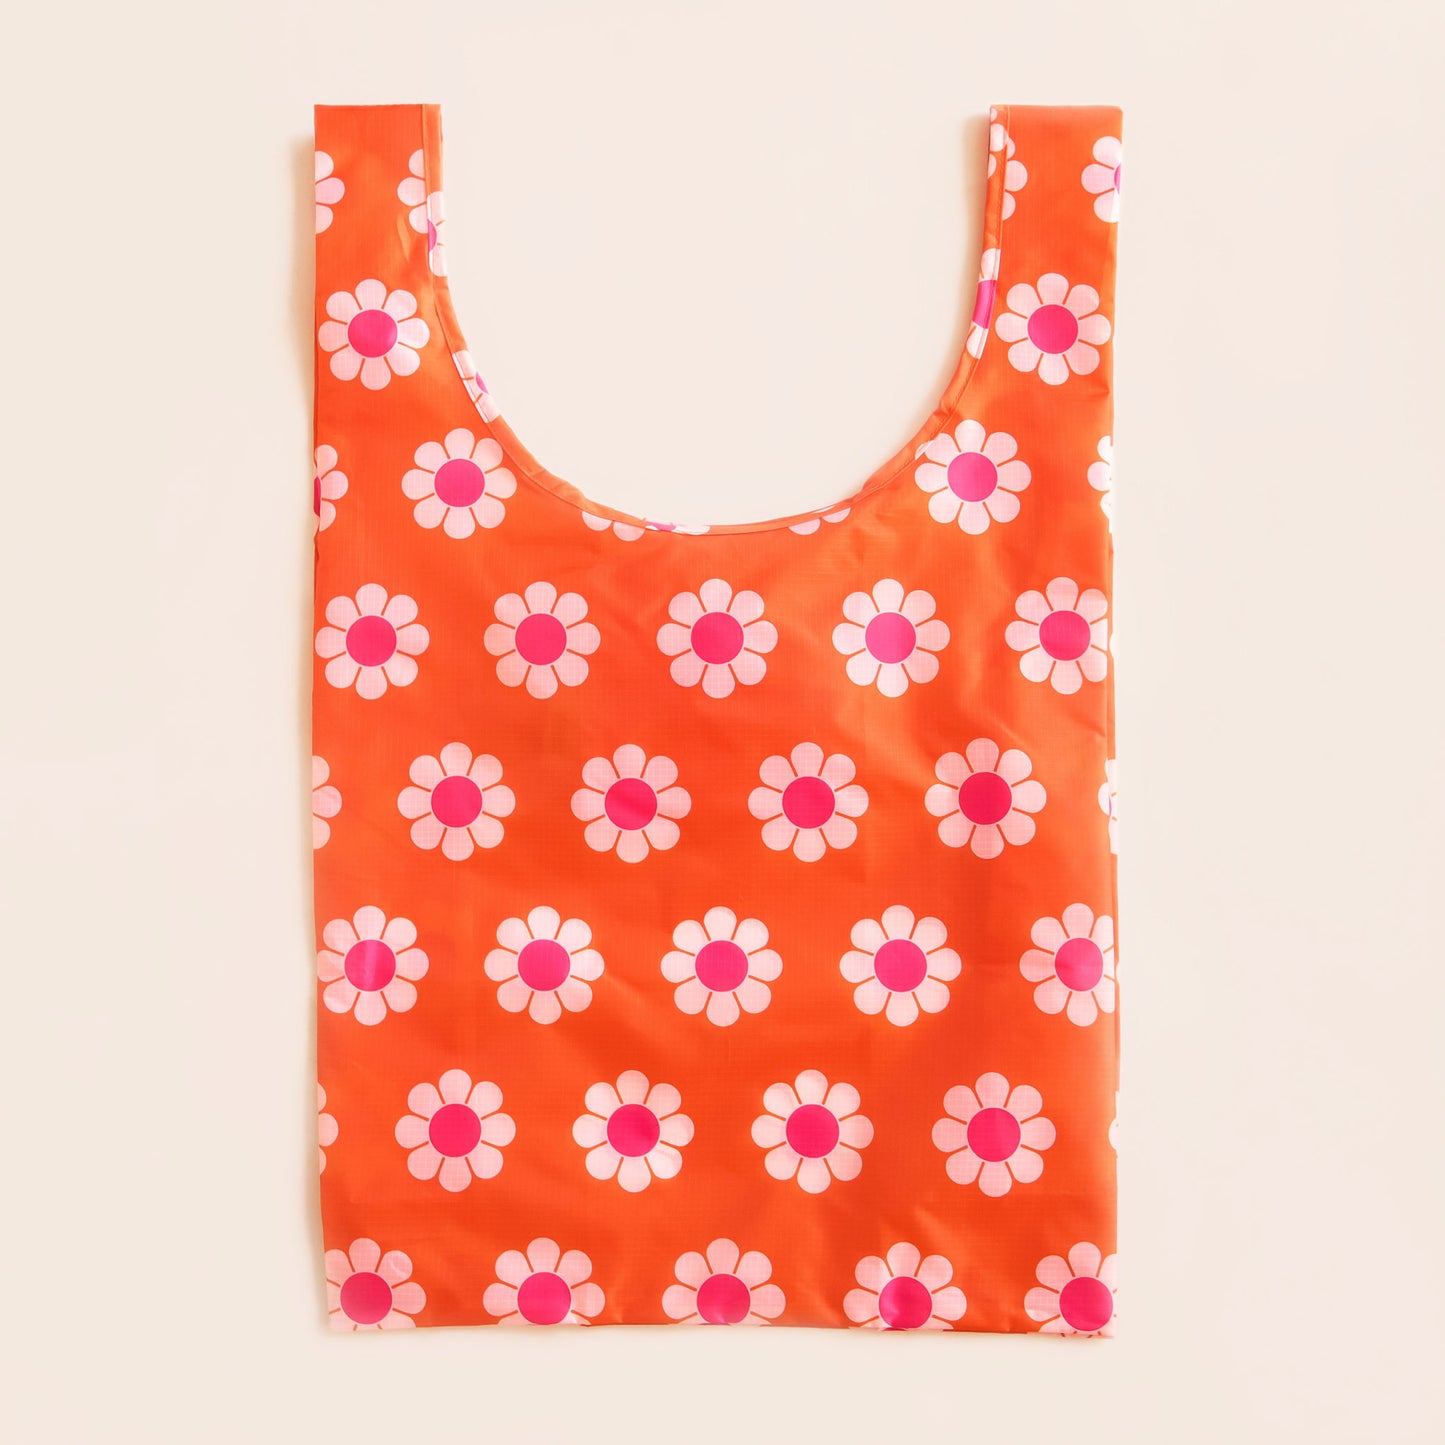 Red-orange reusable bag covered in a print of simple flowers with white petals and pink centers. The bag is positioned flat on a table and has a 'U' shape between two handles. 